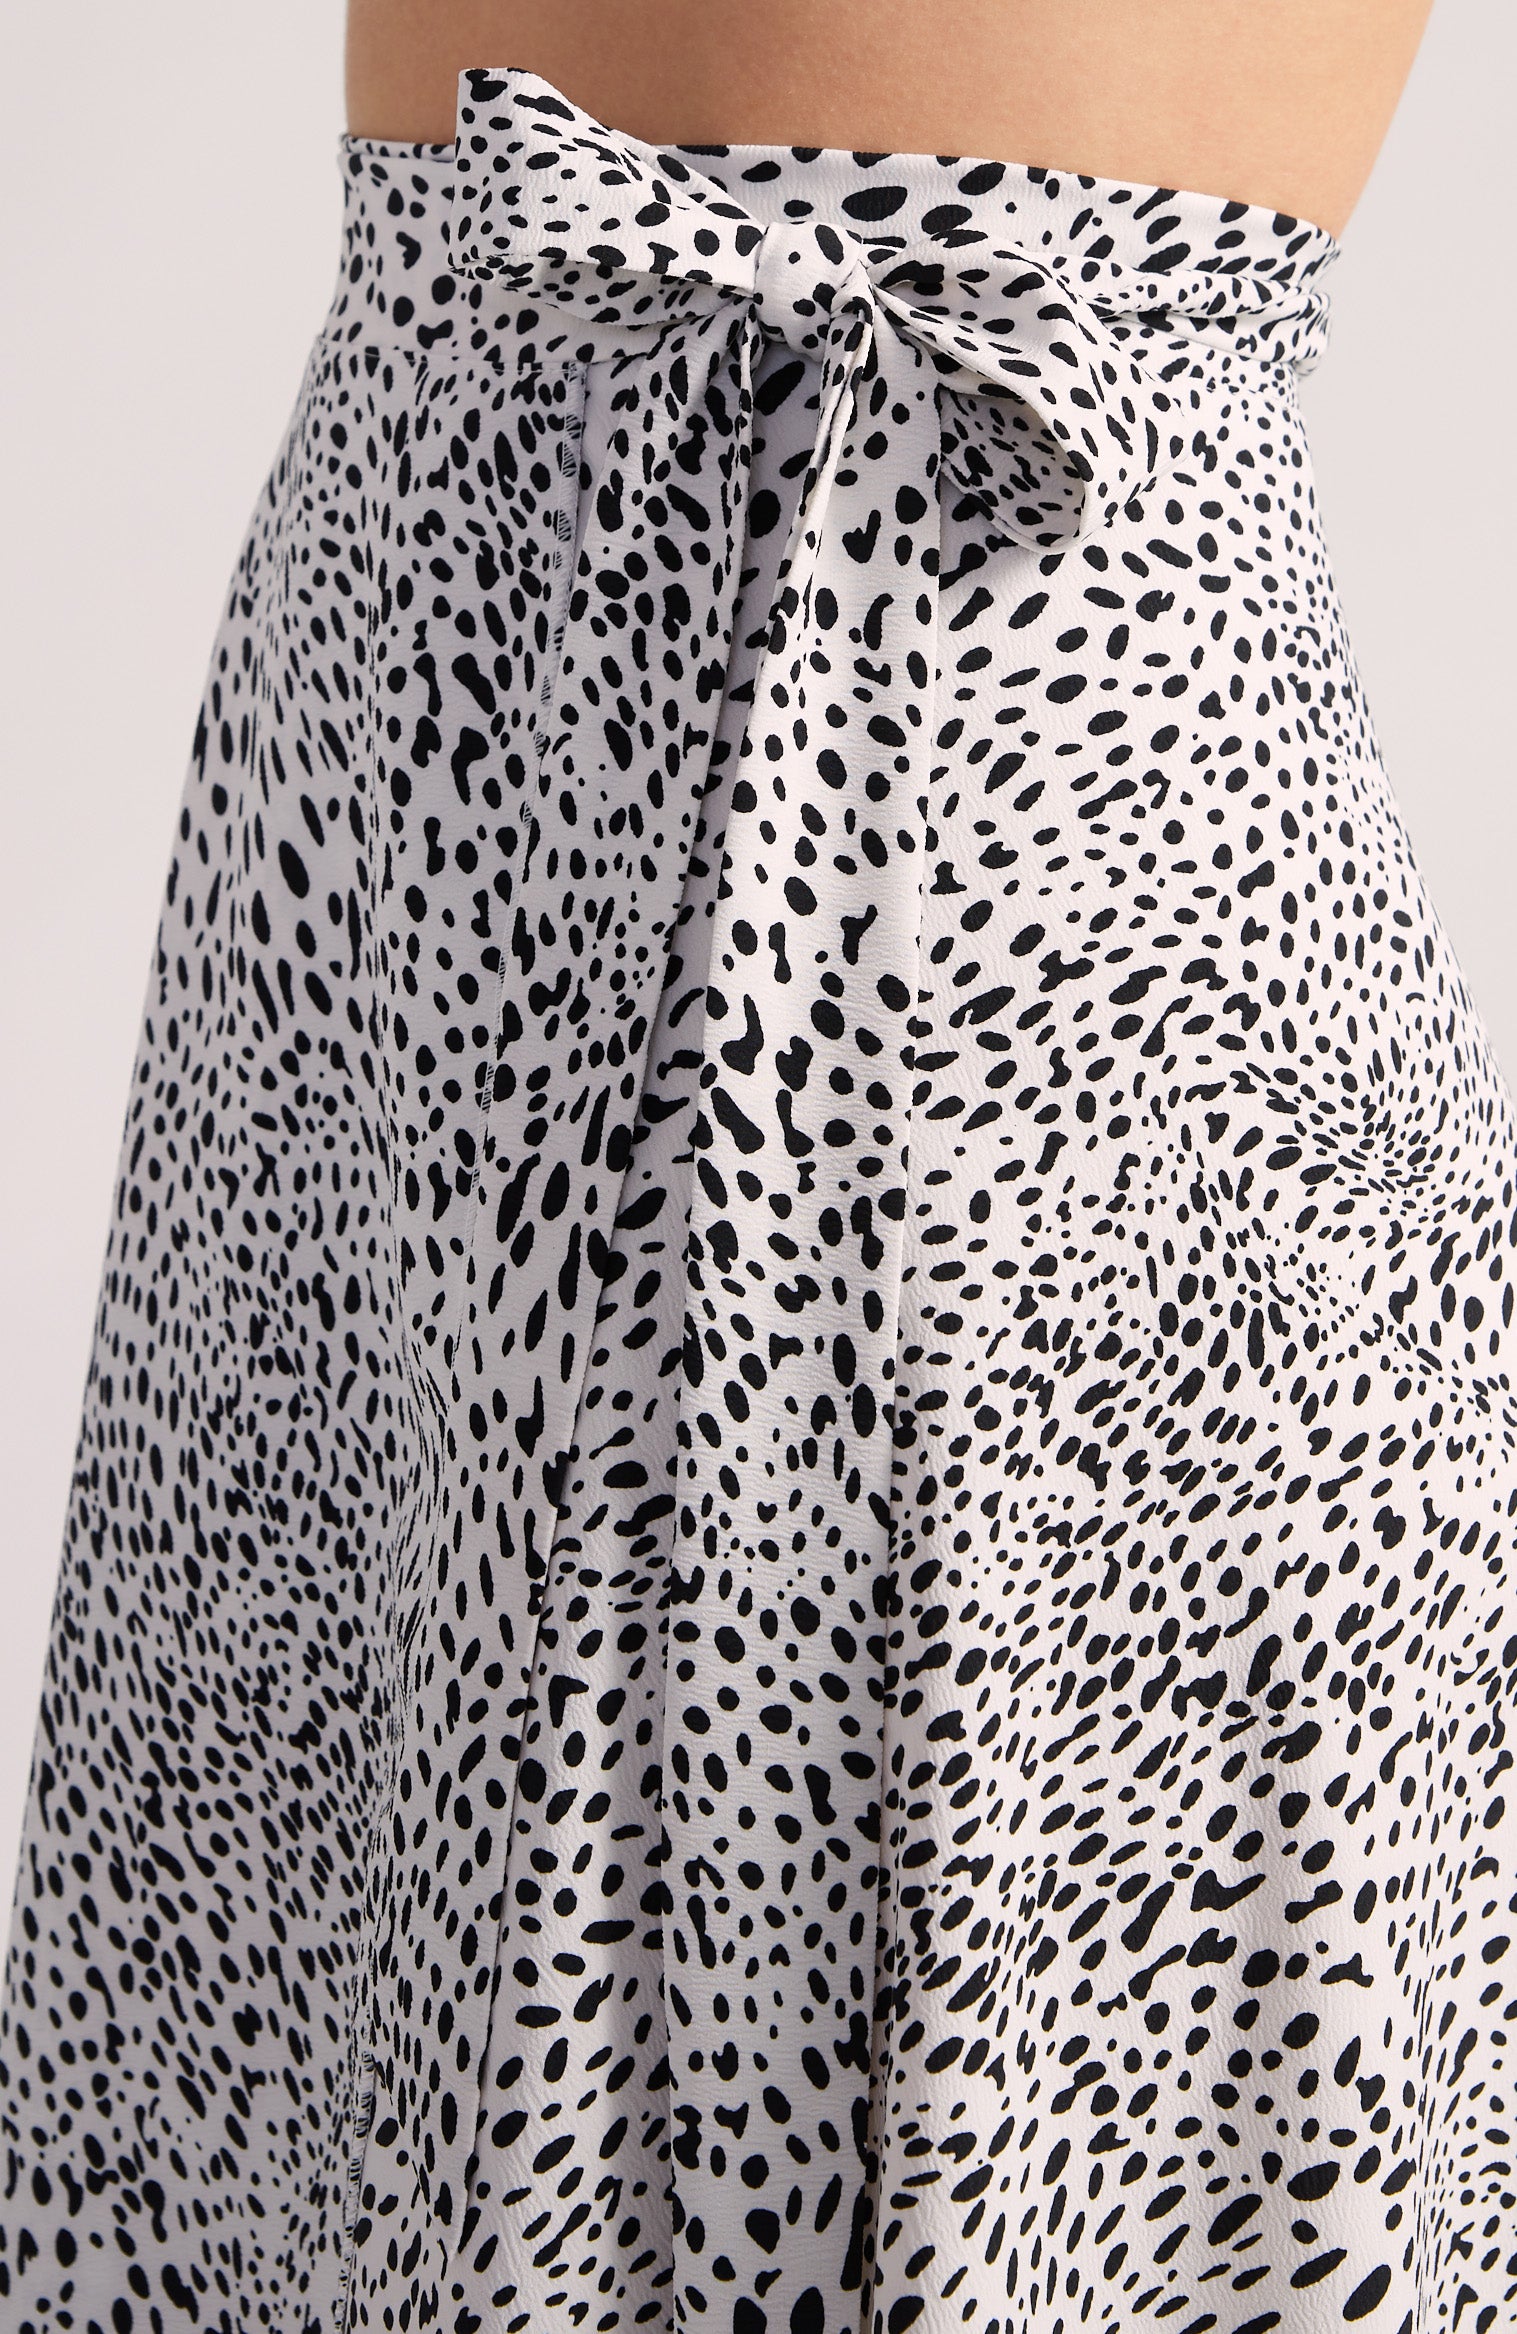 COCO - Dotted Wrap Skirt in Classic Black & White